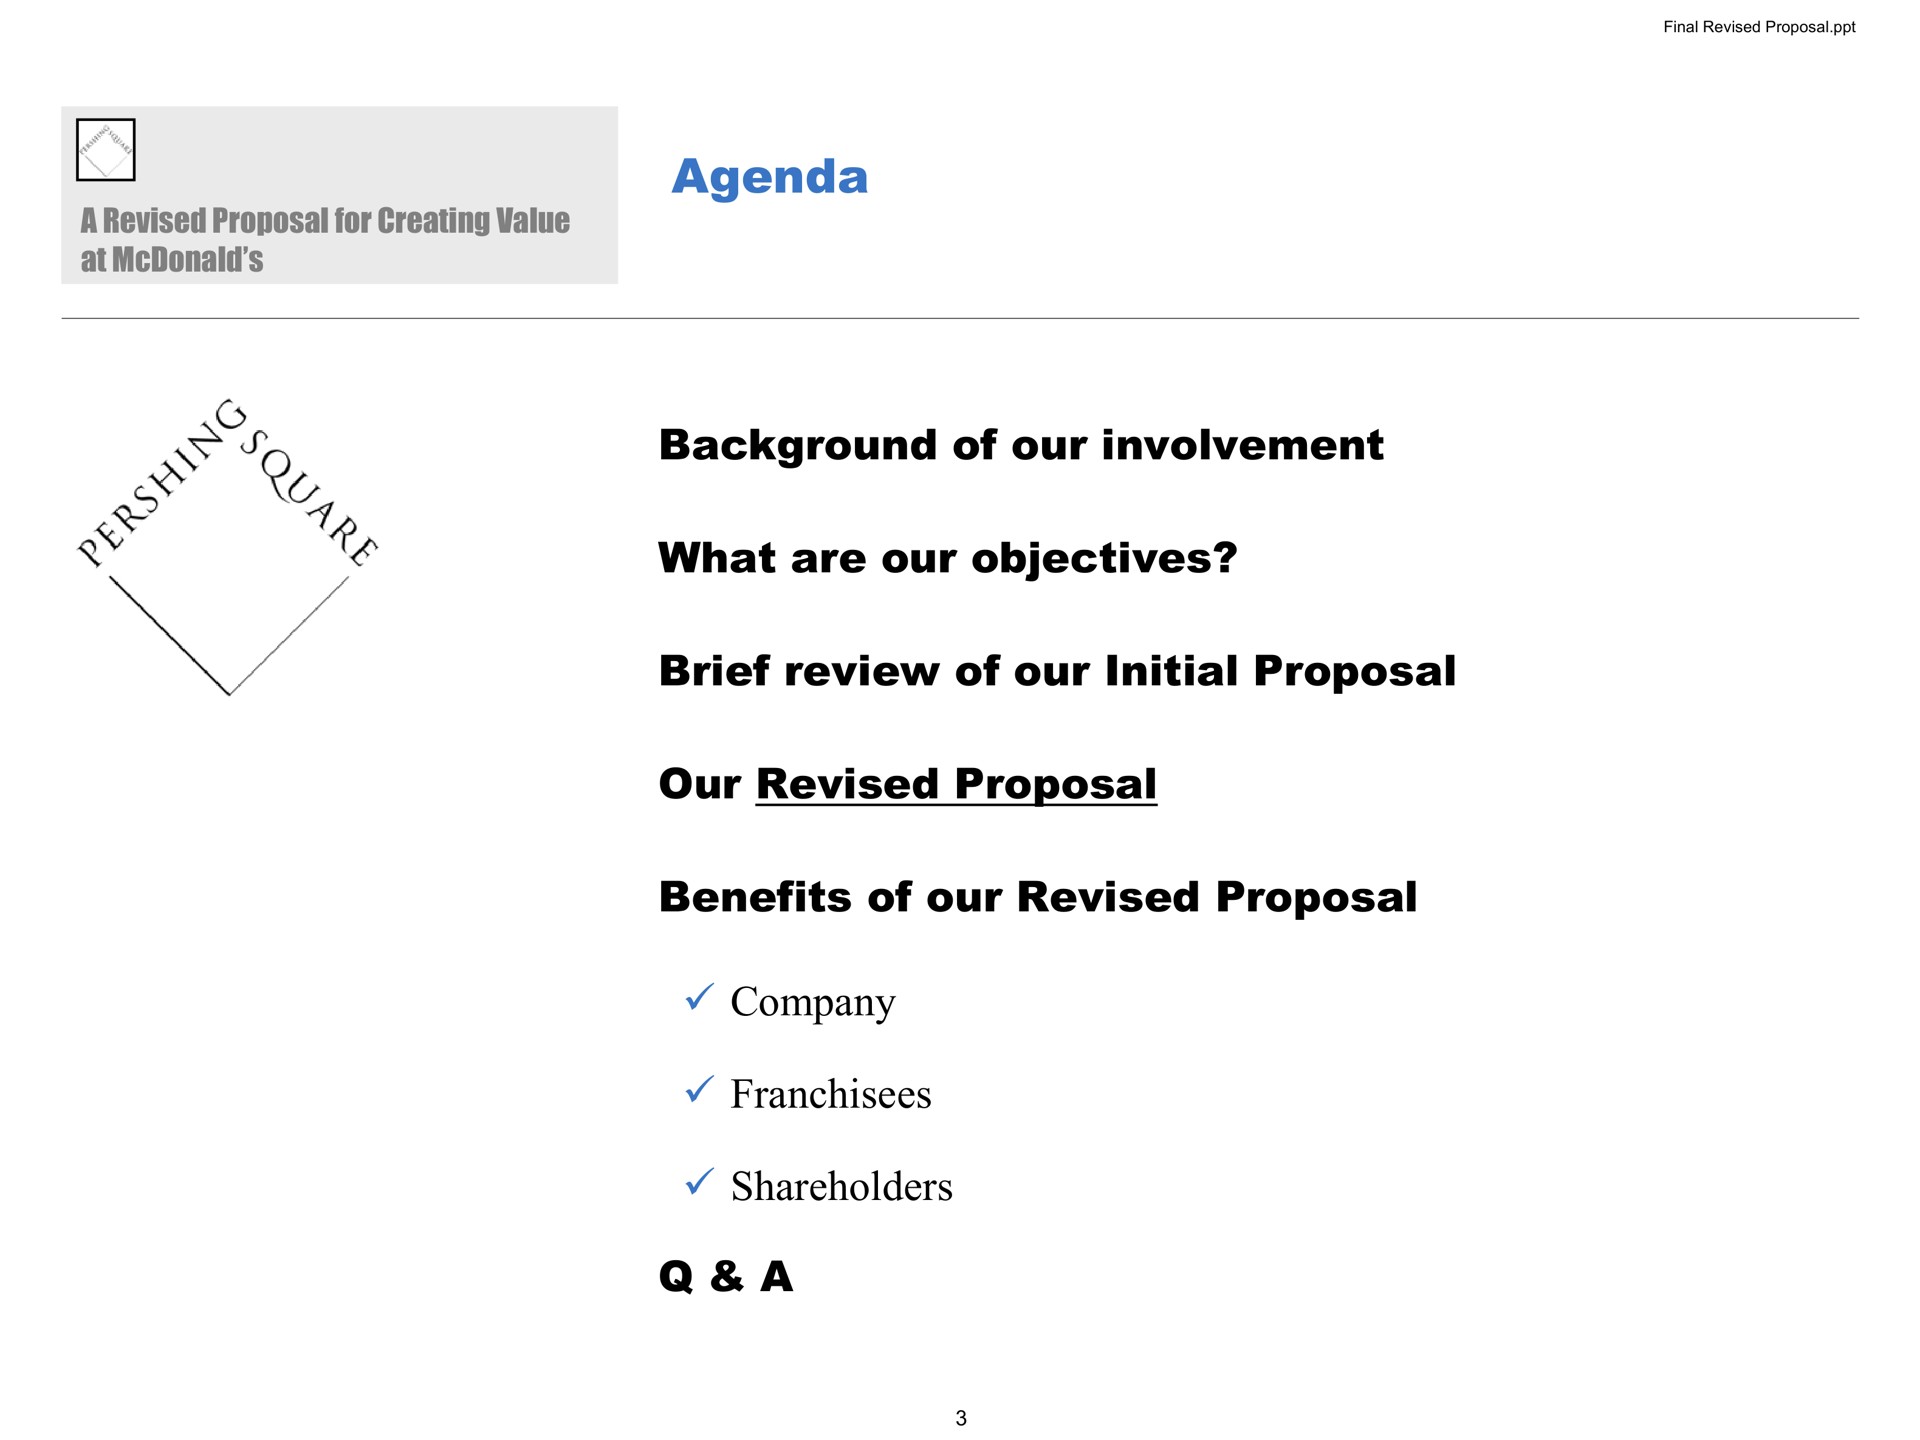 agenda background of our involvement what are our objectives brief review of our initial proposal our revised proposal benefits of our revised proposal company franchisees shareholders a | Pershing Square